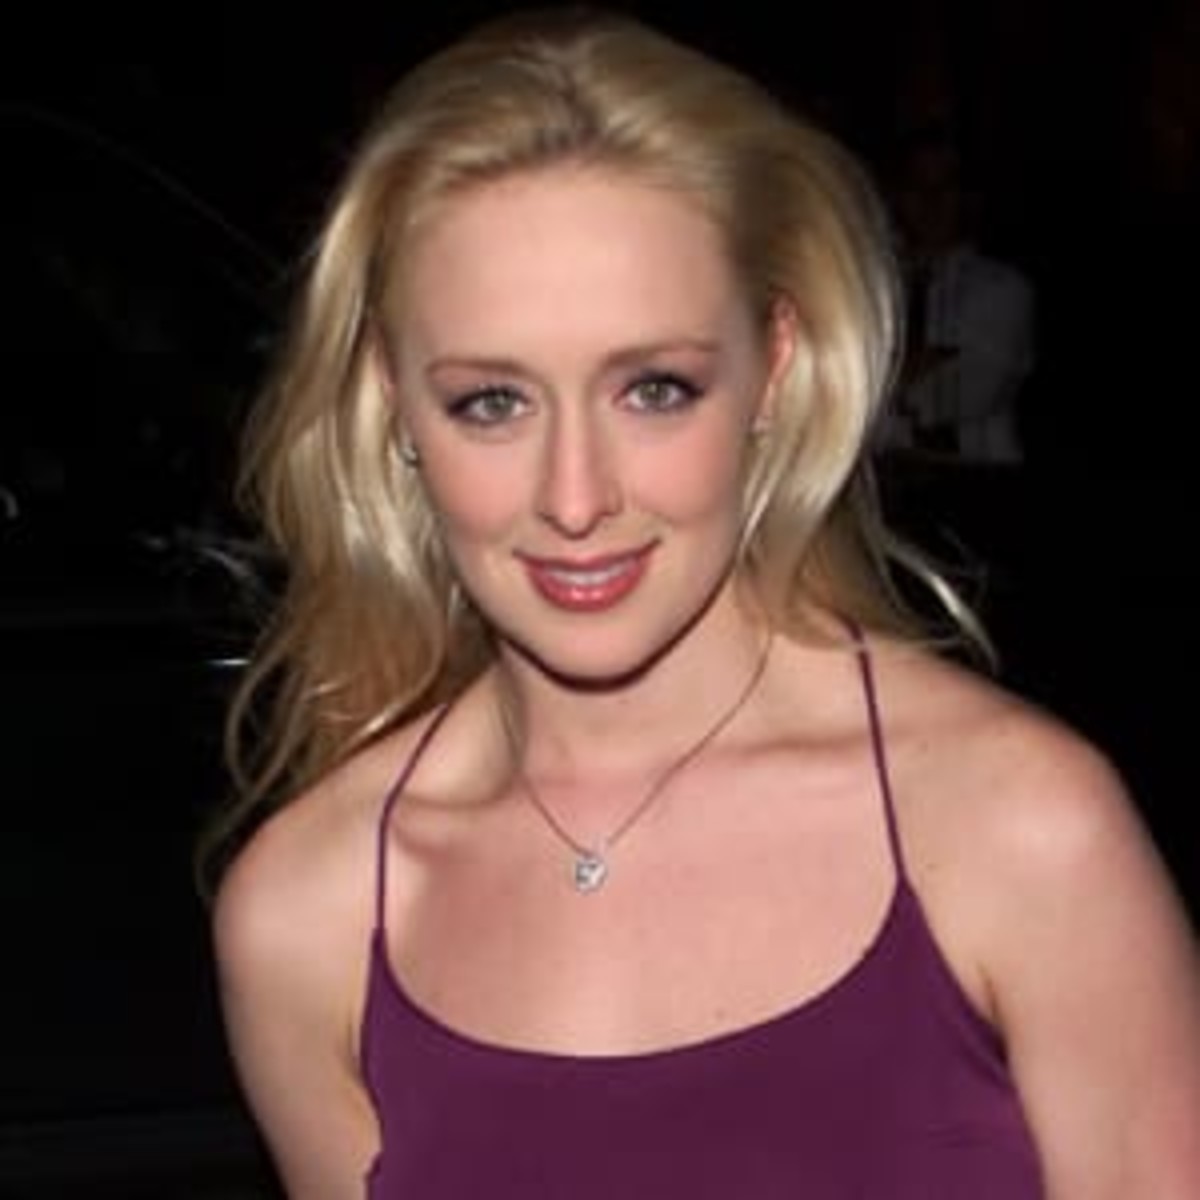 Mindy McCready was best known for her hit country music album "Ten Thousand Angels," as well as her personal struggles. "